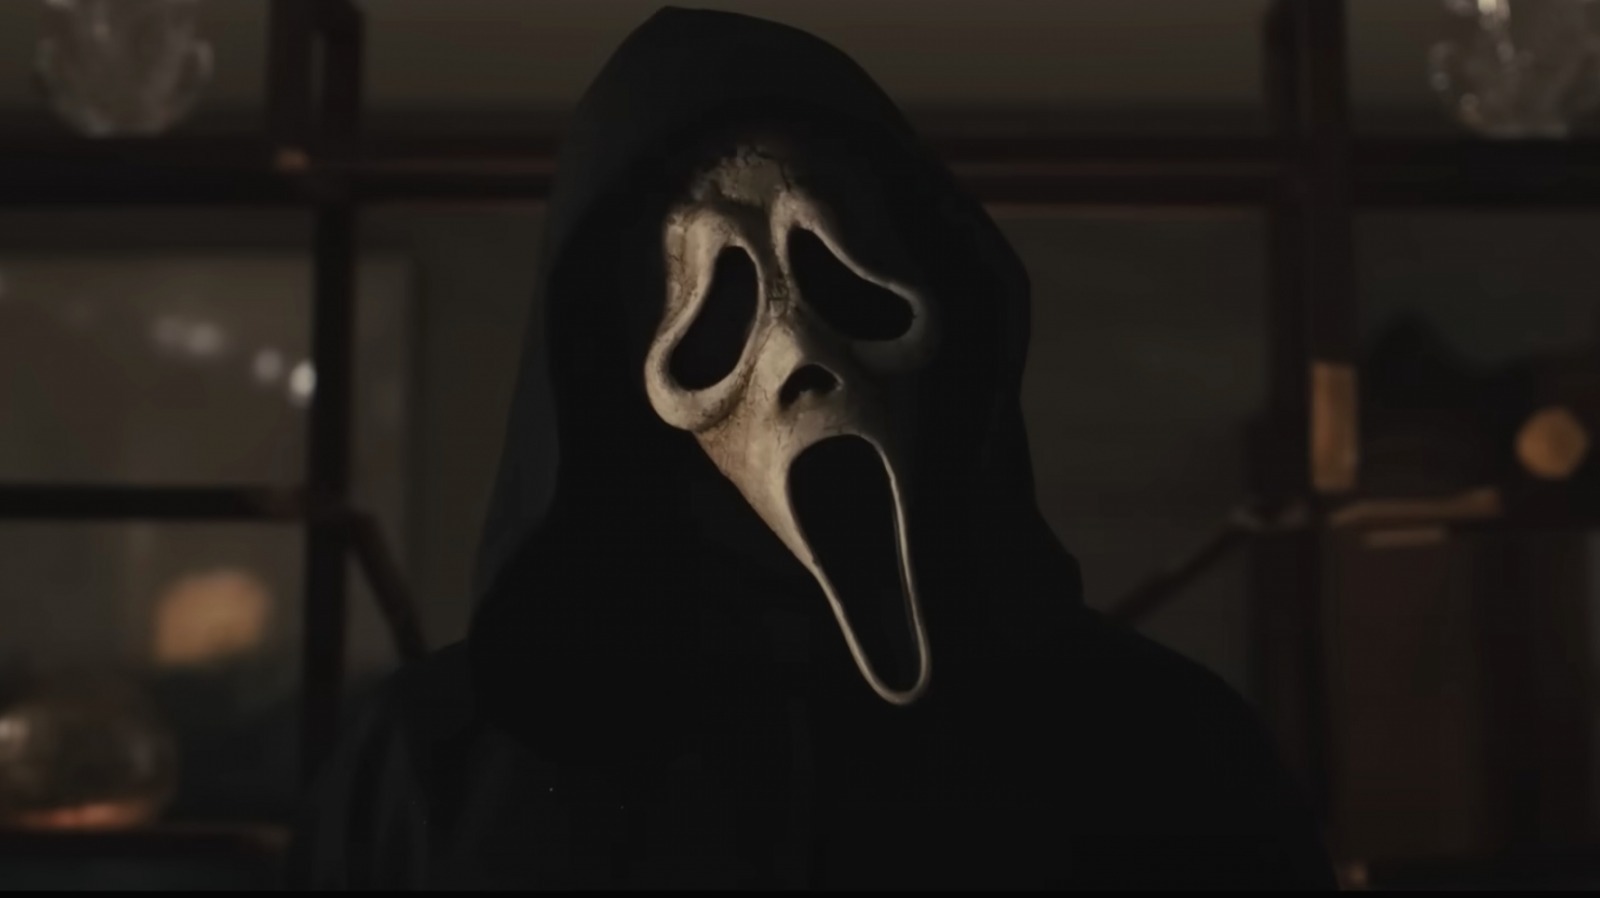 Scream 6 Box Office: Film Heads For Highest Opening Weekend